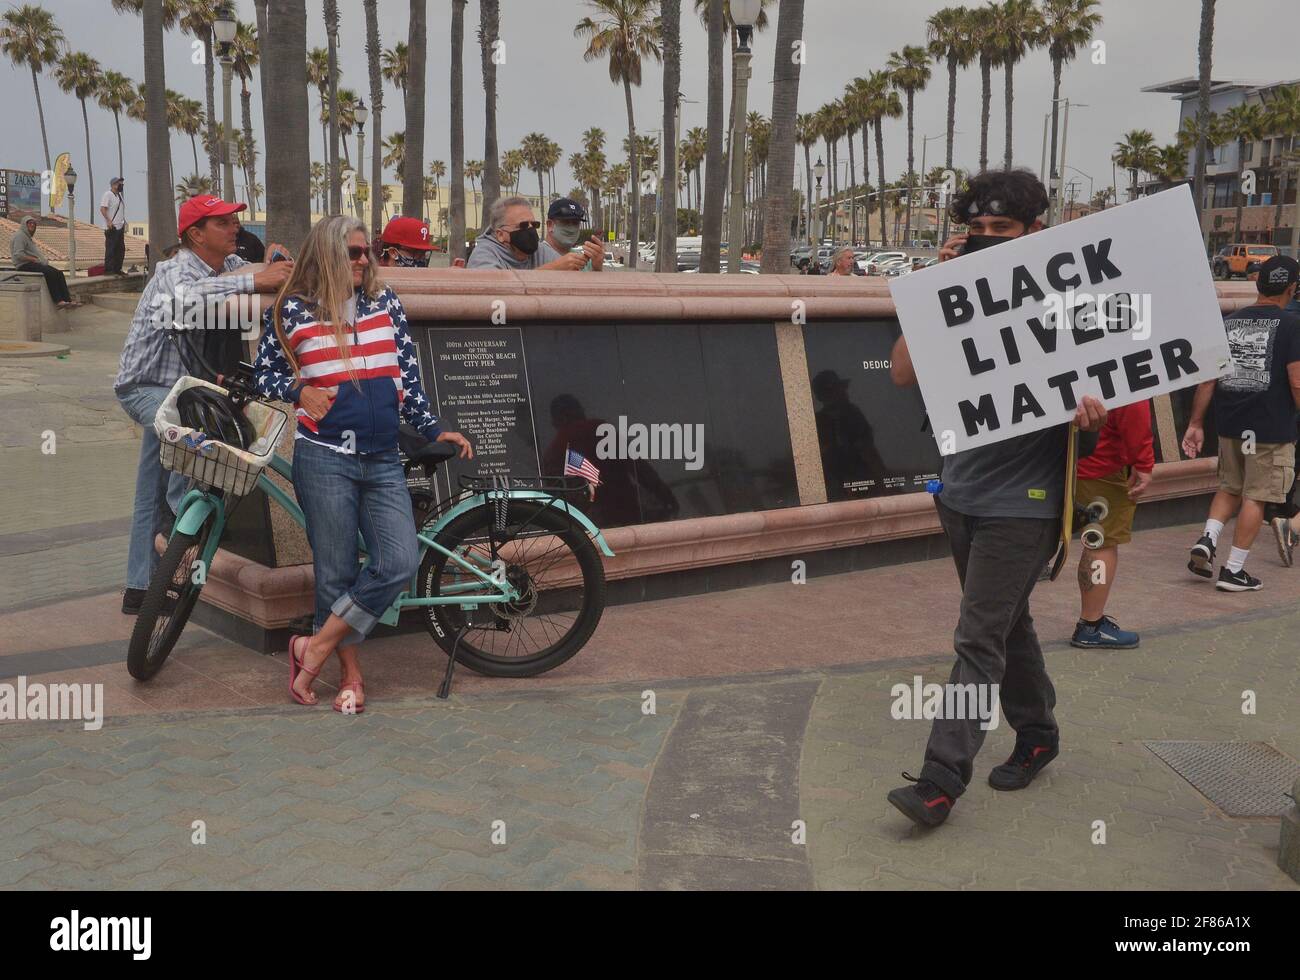 Outnumbered White Lives Matter and counter Black Lives Matter demonstrators face off in Huntington Beach, California on Sunday, April 11, 2021. The BLM protesters occupied Pier Plaza to prevent any demonstrators by the WLM group. The WLM rally was part of a nationwide group of protests planned in a handful of cities across the country to combat what organizers see as the threat to the white race from multiculturalism and what they term as the 'anti-white' bias in media, government and education. Photo by Jim Ruymen/UPI Stock Photo